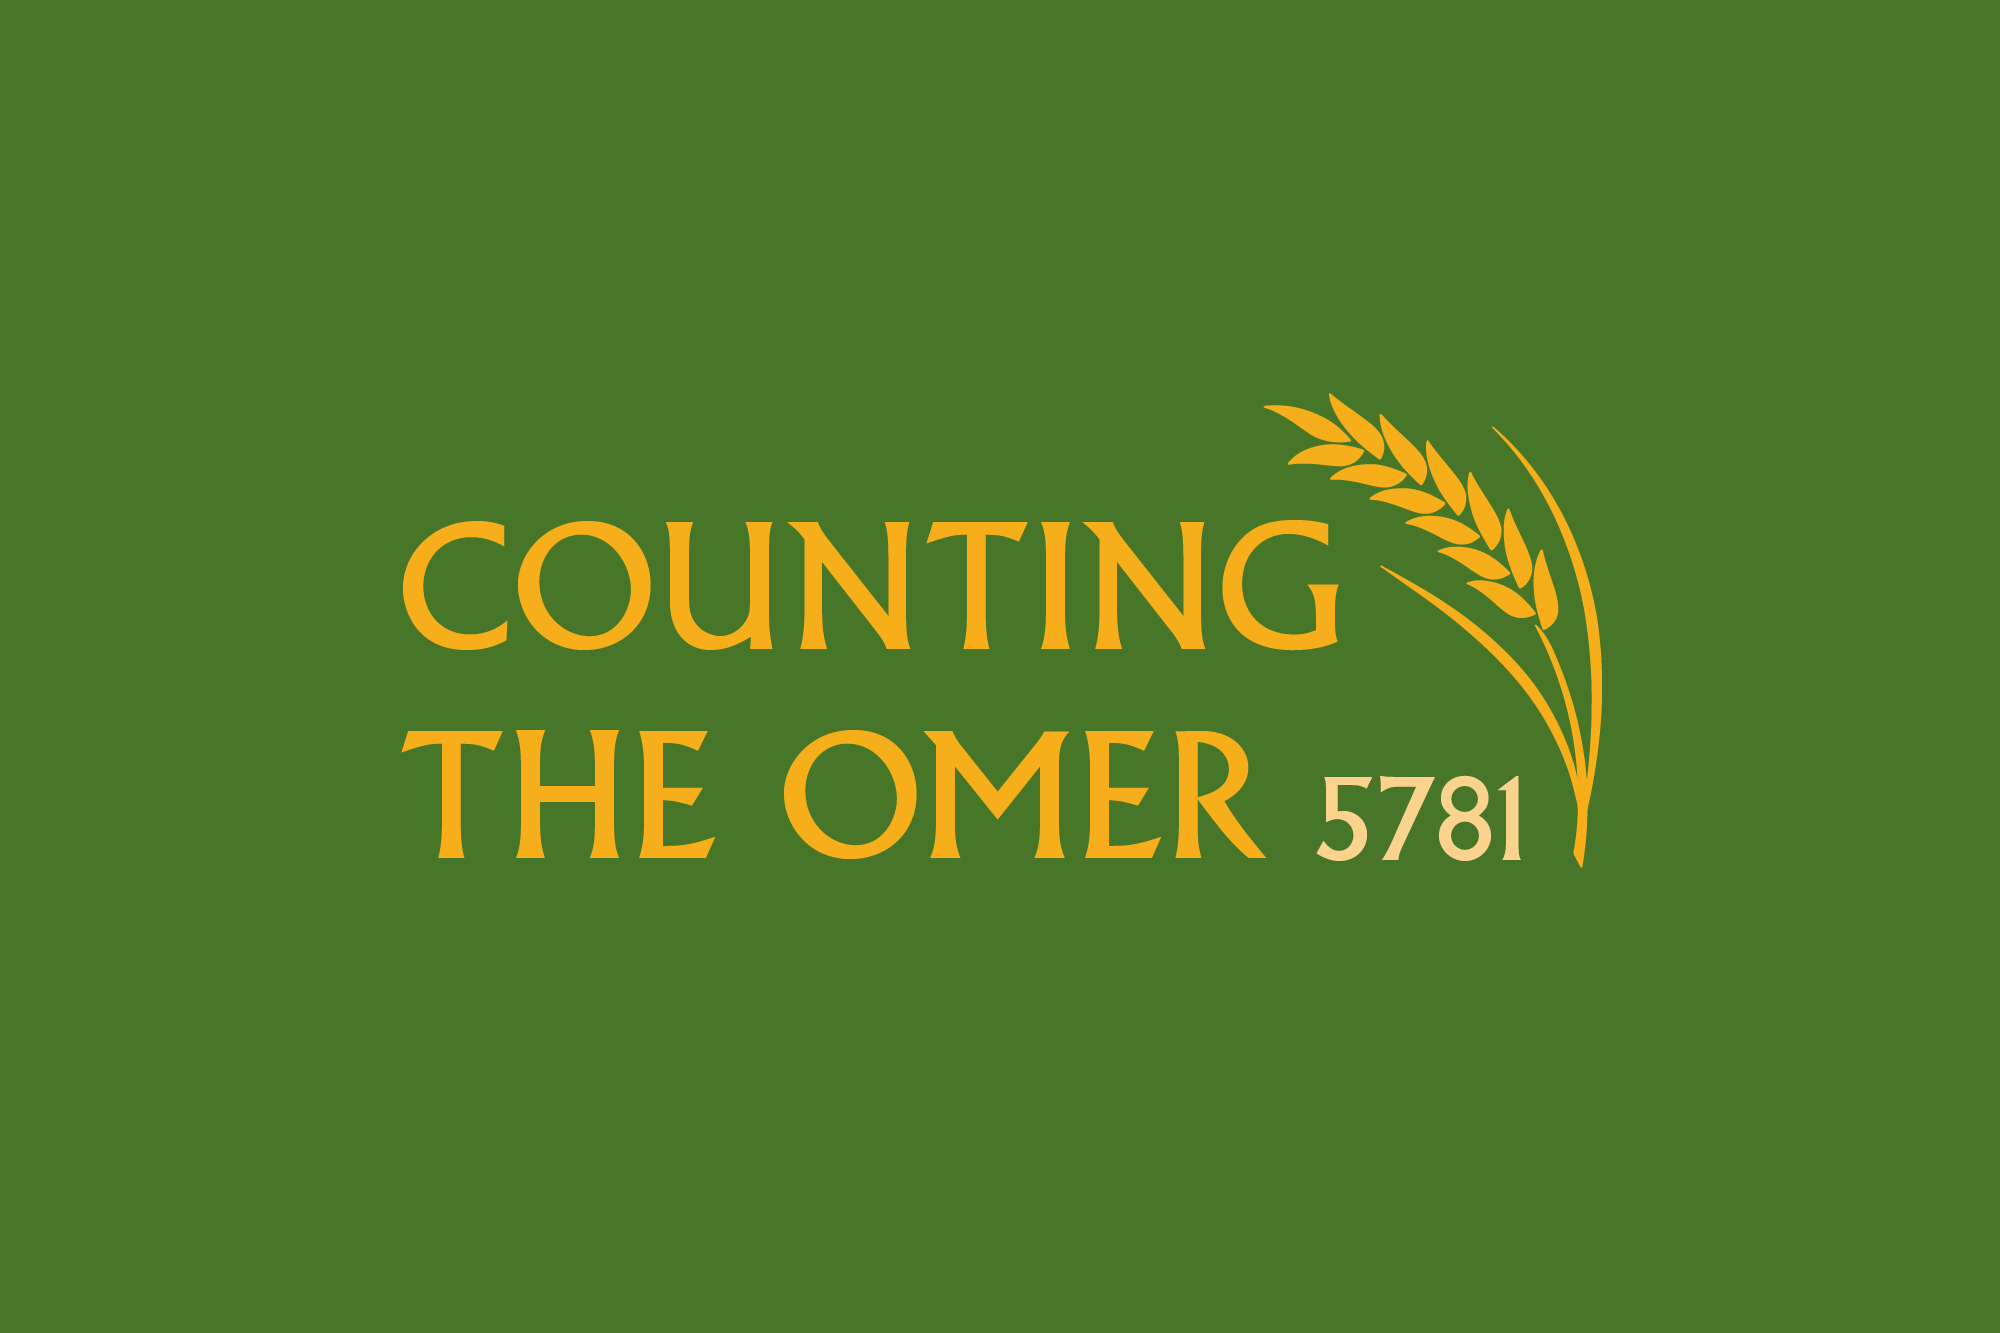 Counting the Omer 5781